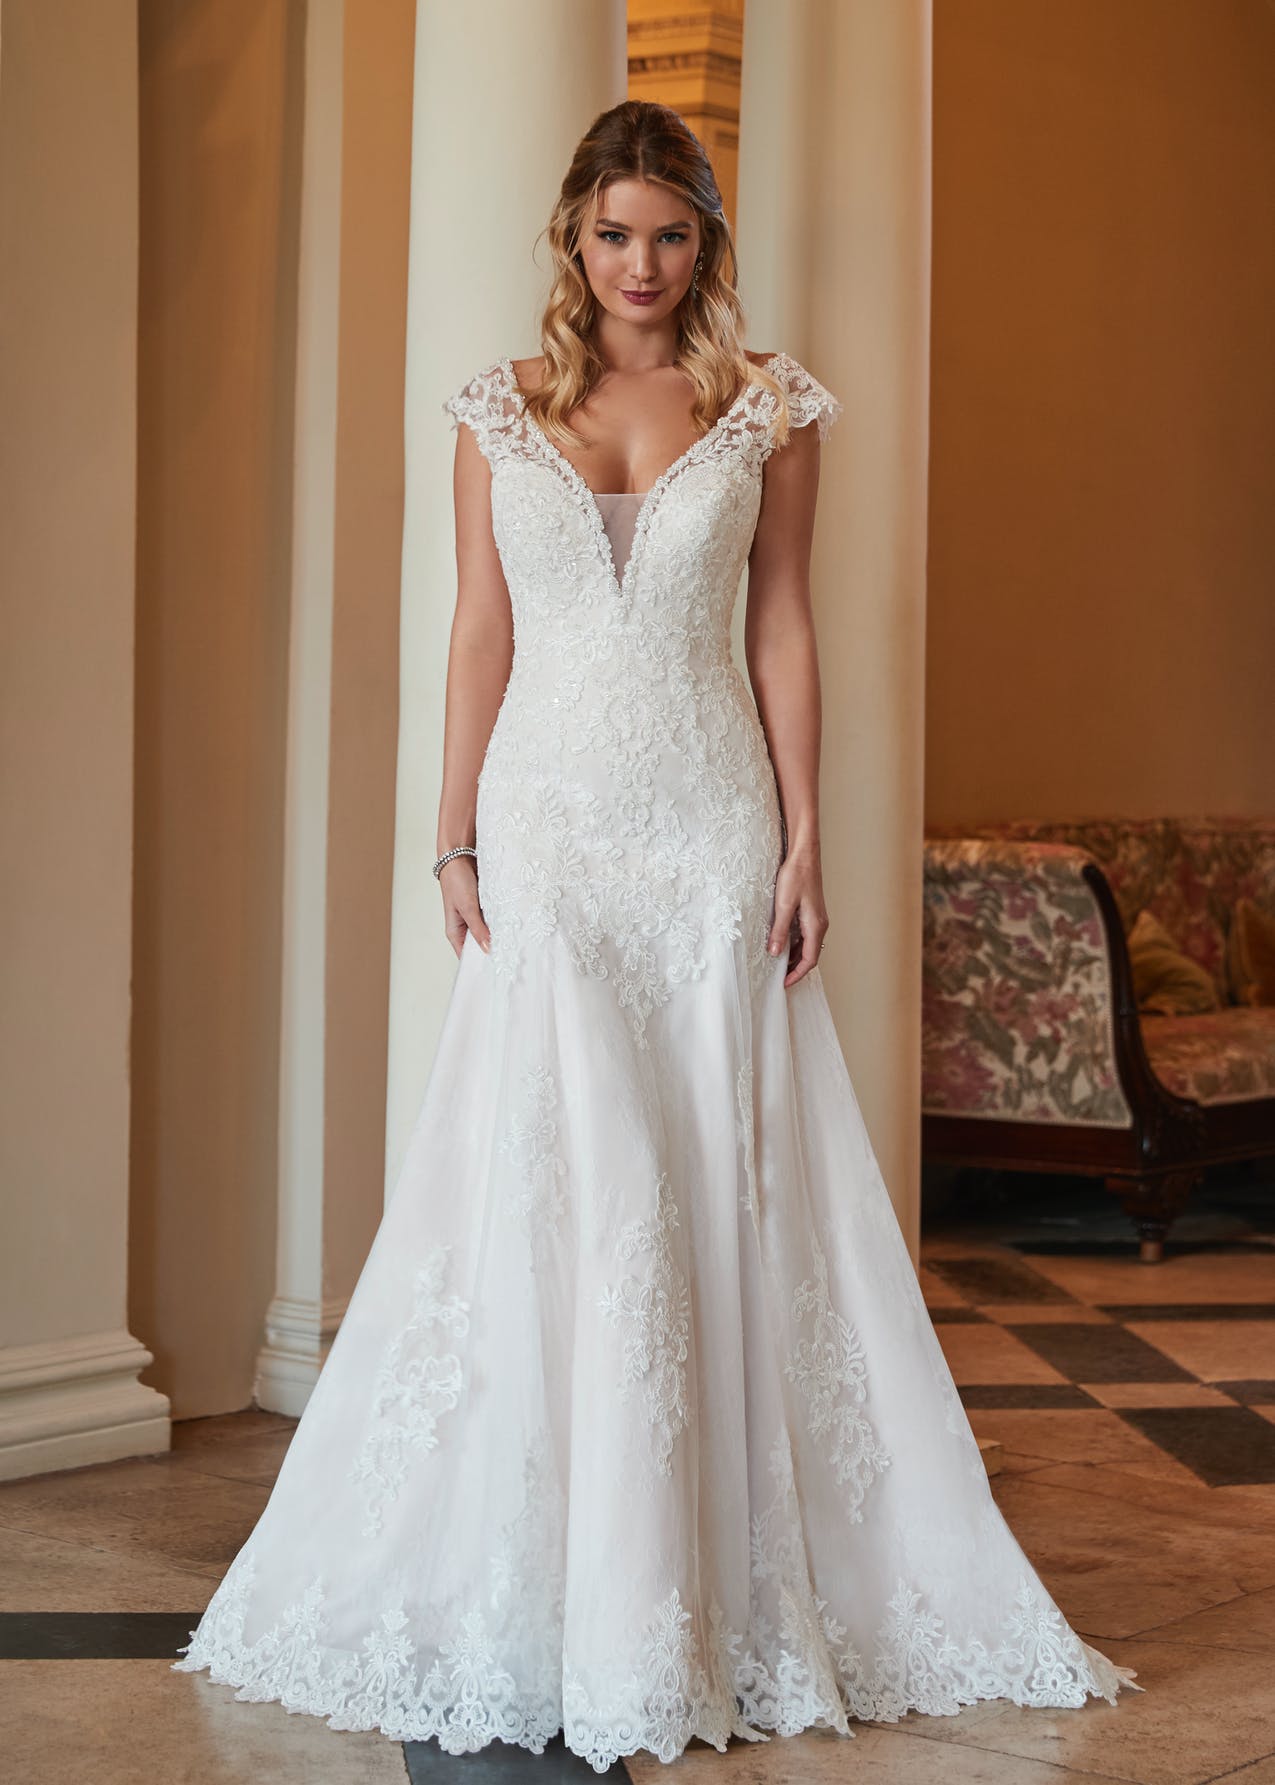 Reese is a timeless fit and flare wedding dress with cap sleeves